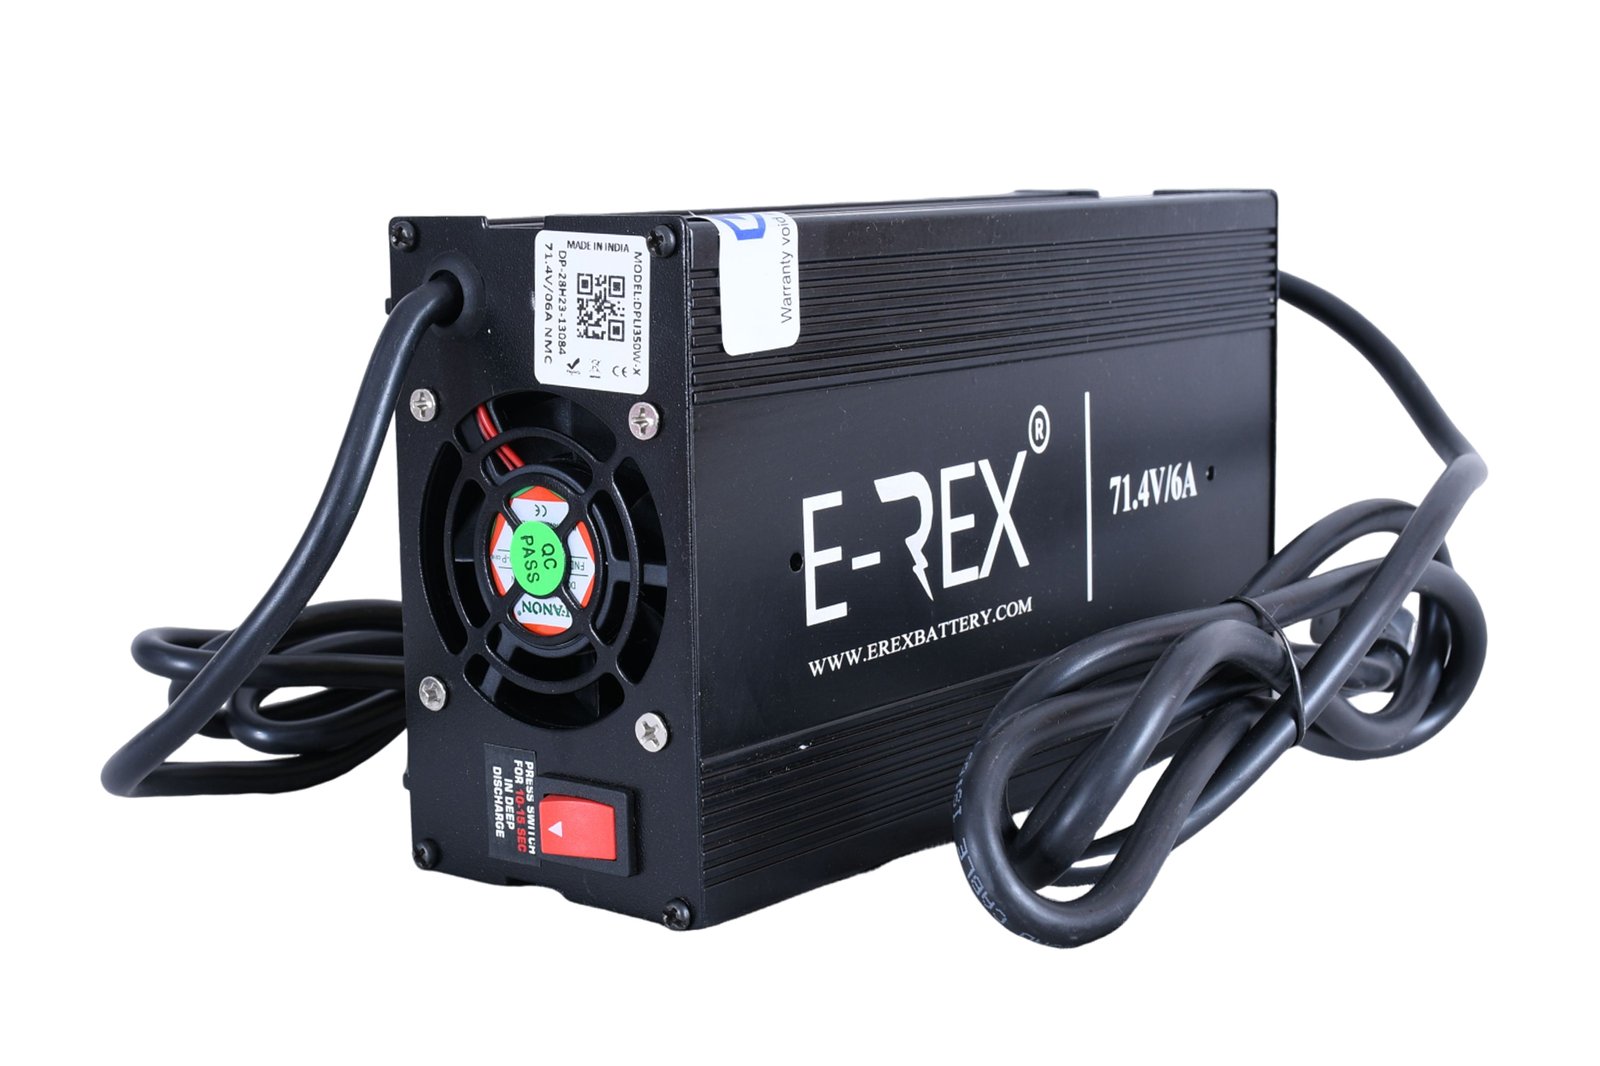 E-Rex 58.8V 6A Lithium Battery Charger Metal Body, Supported battery - 48V  - E-Rex